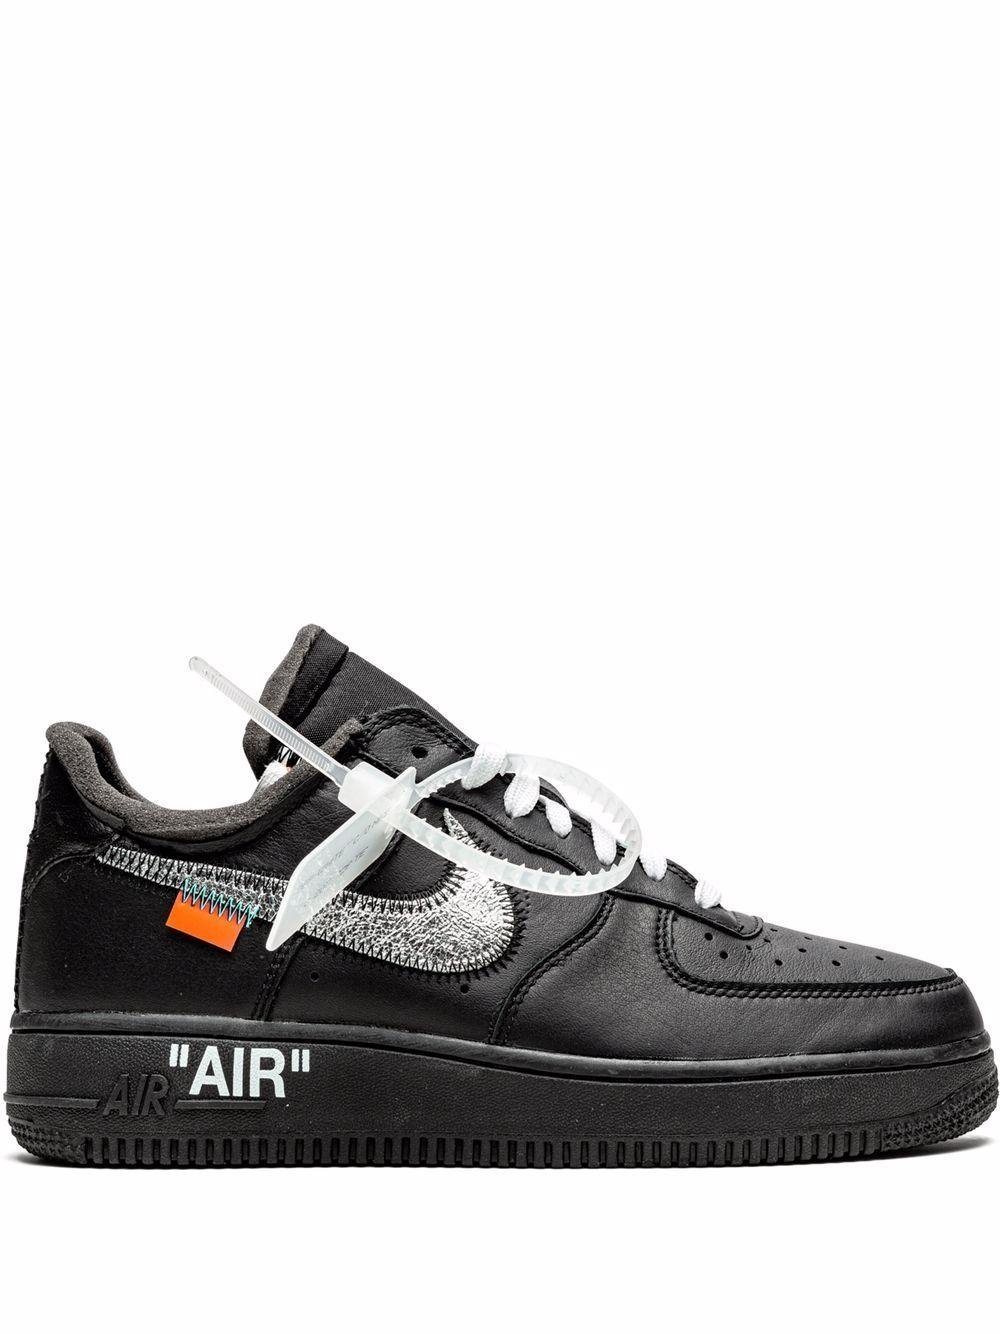 NIKE X OFF-WHITE Air Force 1 07 Virgil off-white - Moma in Black